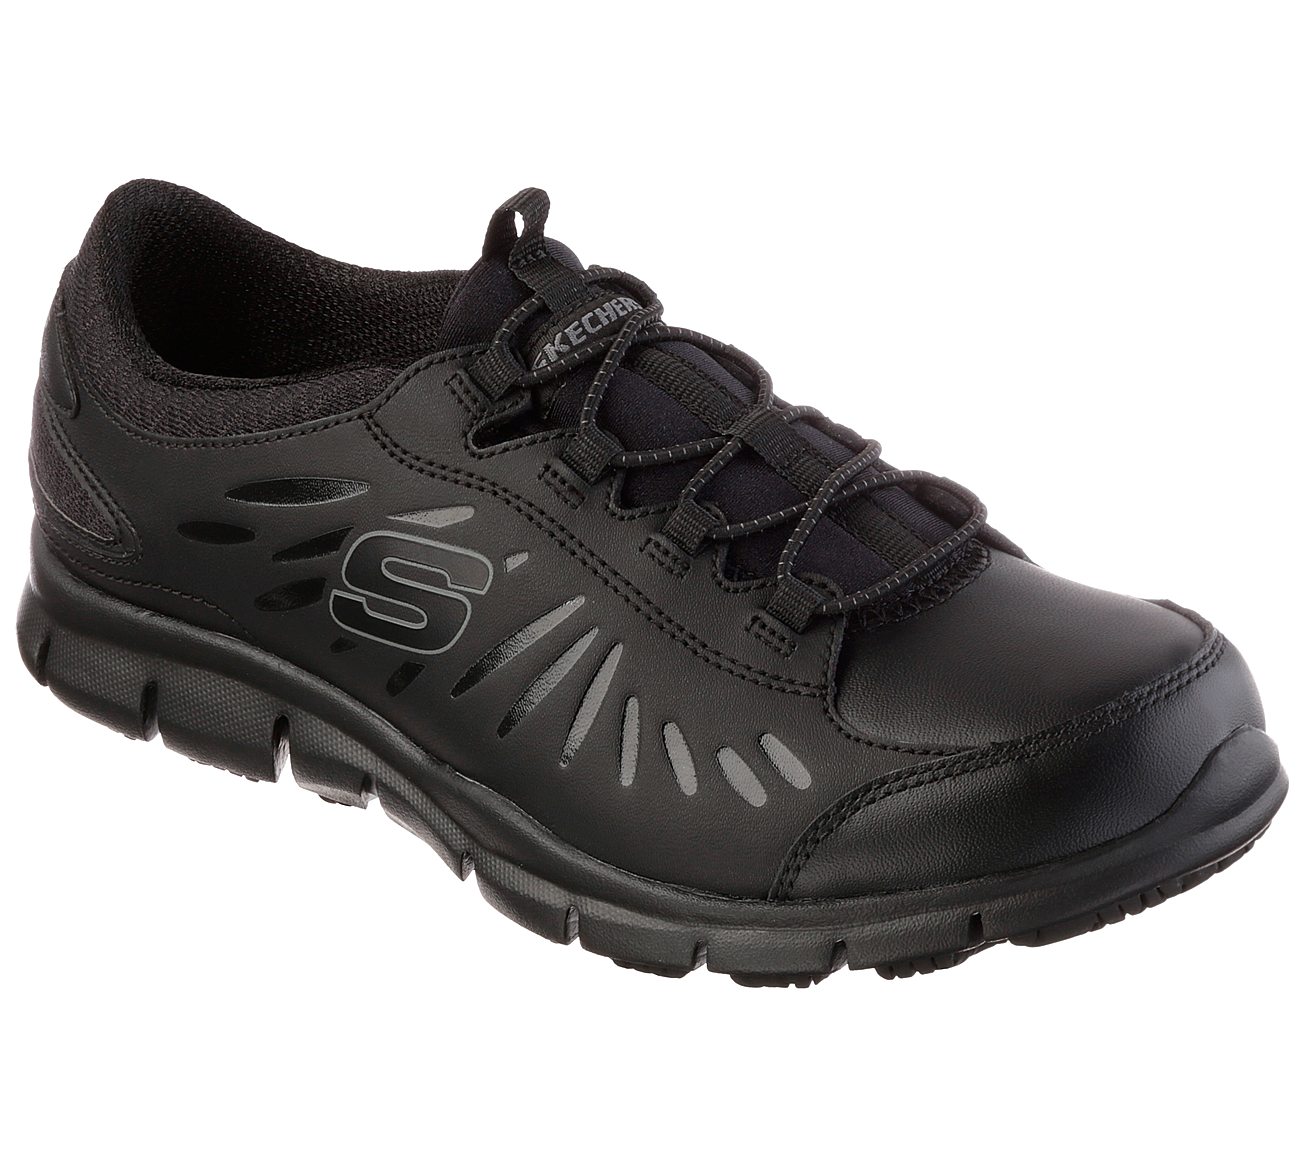 Buy SKECHERS Work Relaxed Fit: Eldred - Fresno SR Work Shoes